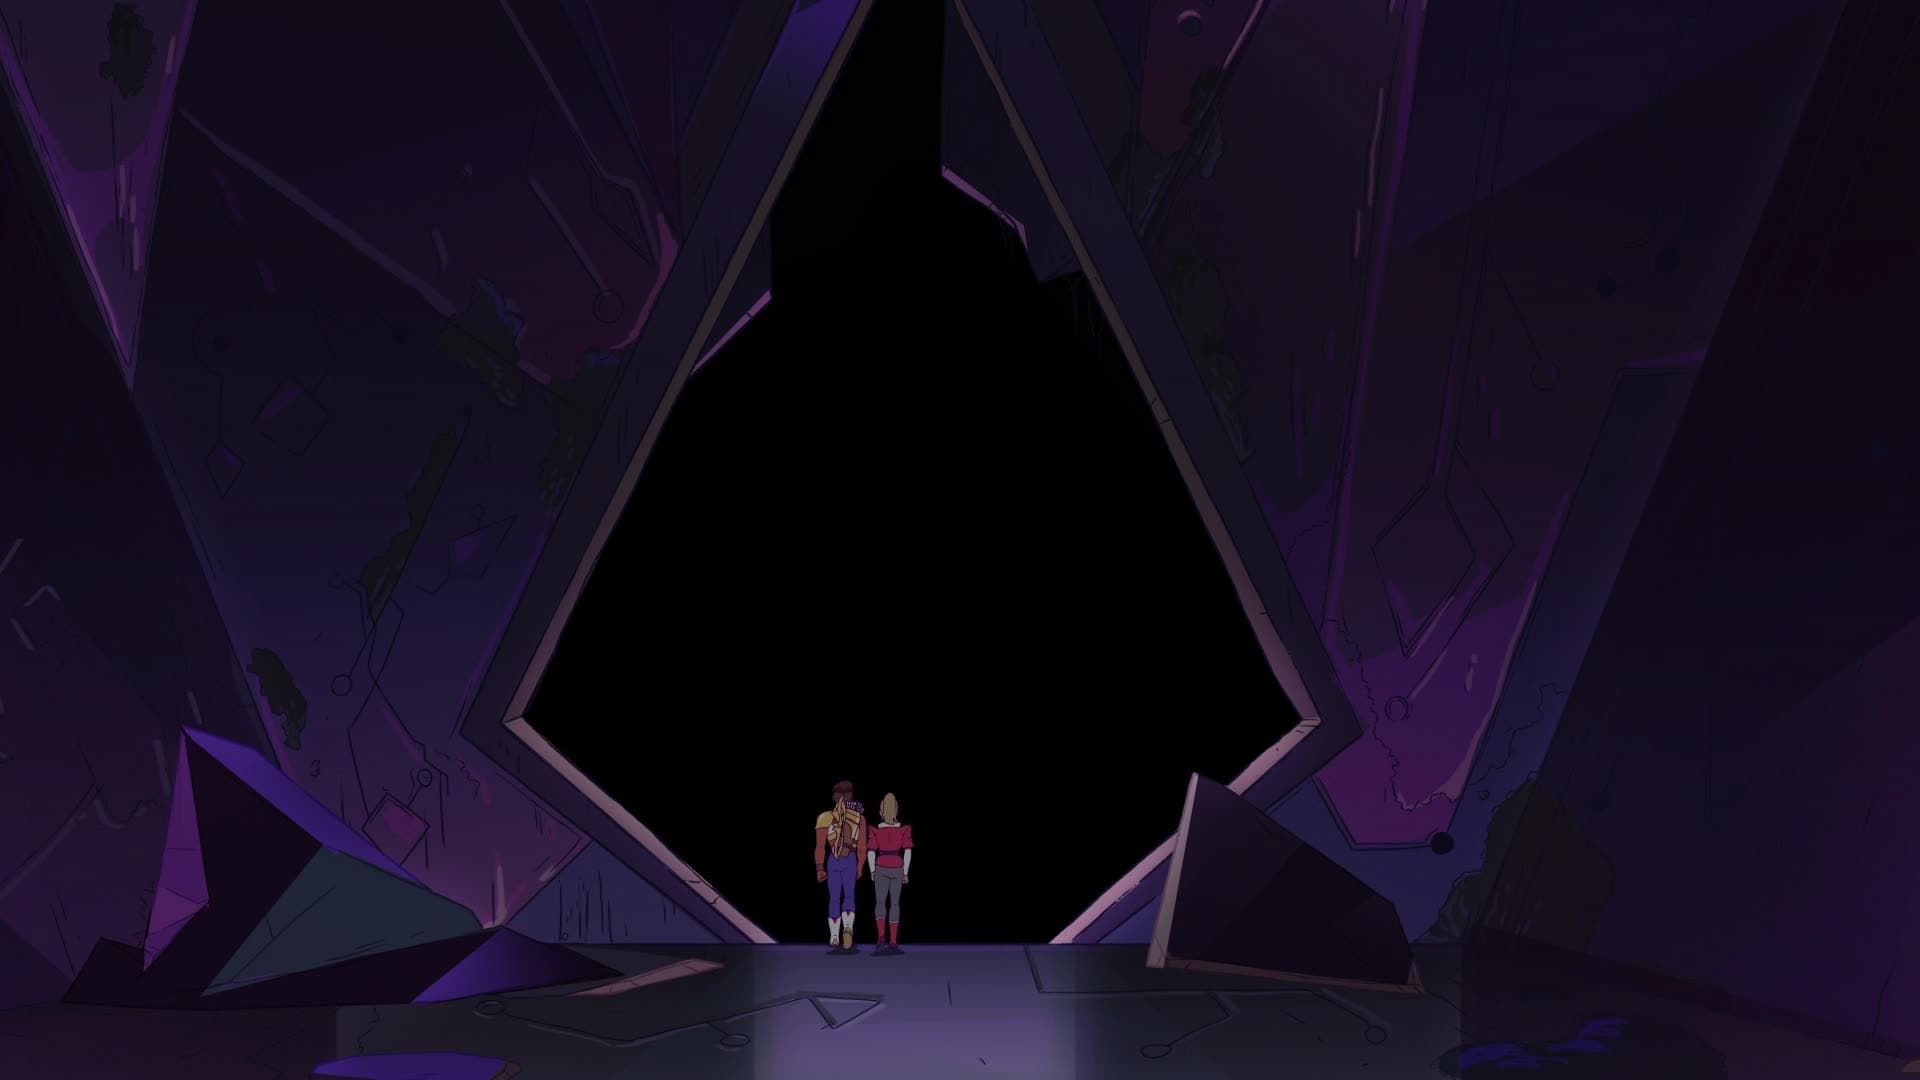 She-Ra and the Princesses of Power background